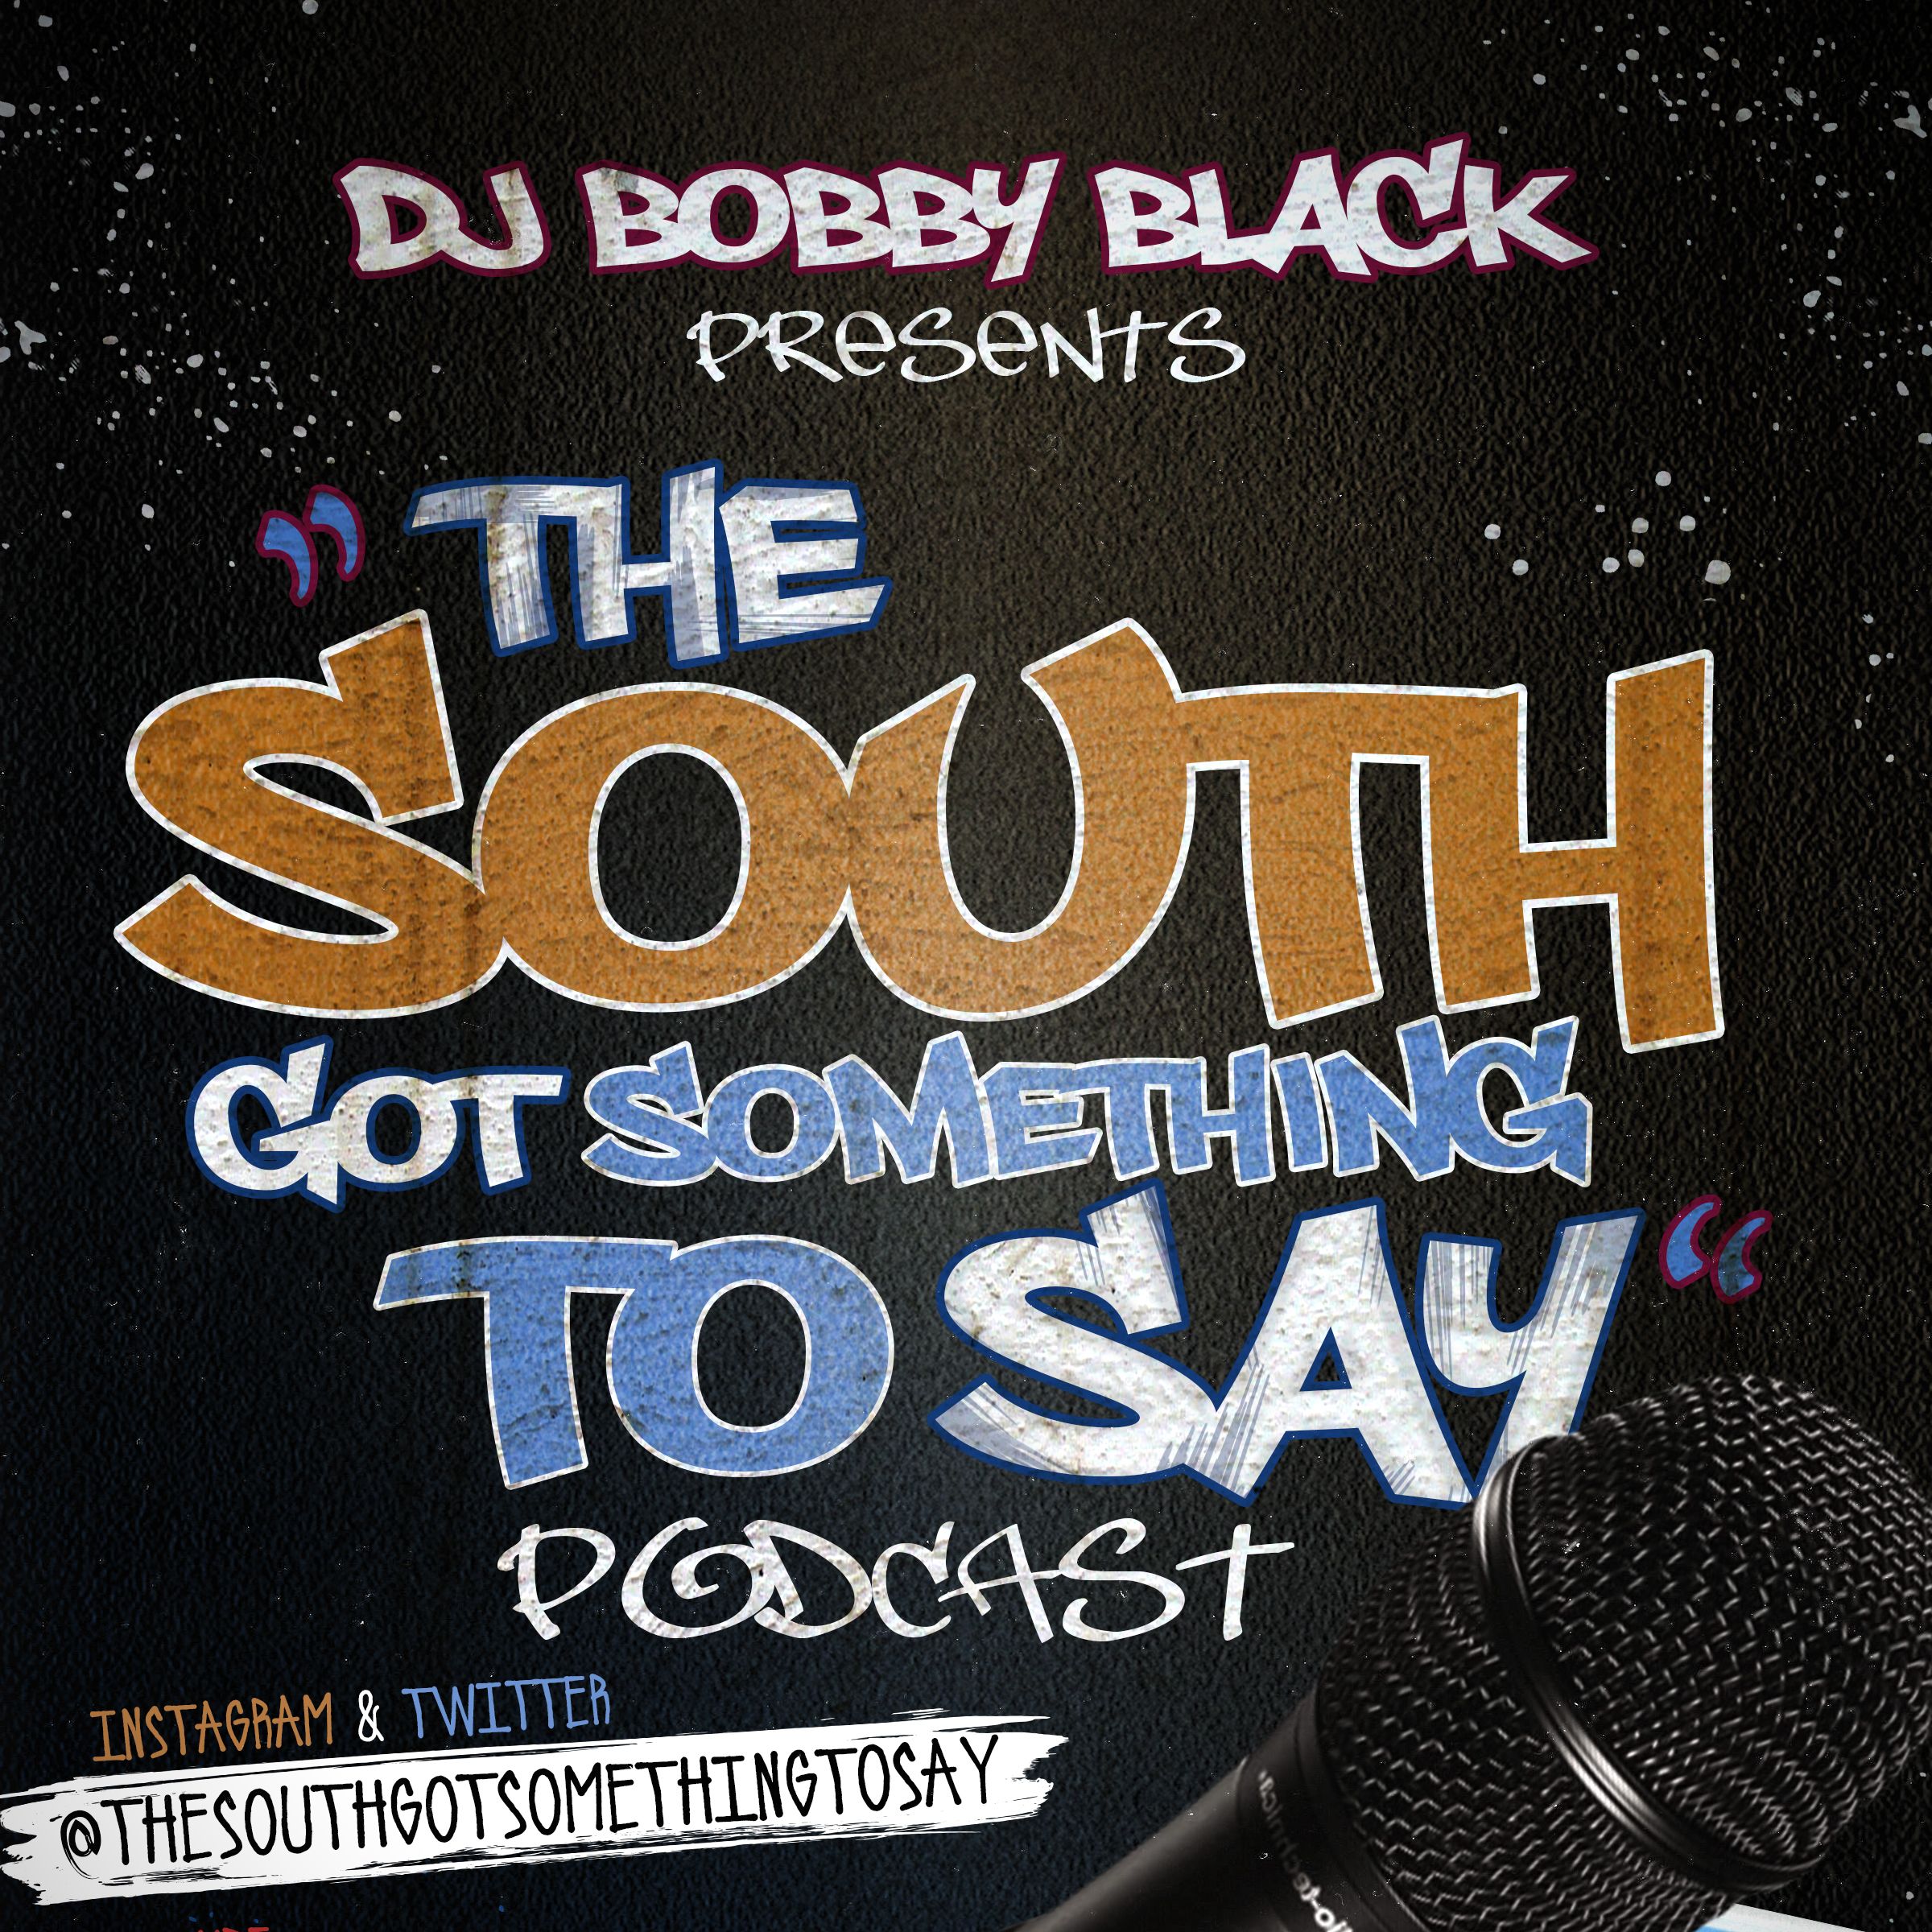 Episode 1 Mc Shy D "The South Got Something To Say" Podcast:Dewayne Roberson